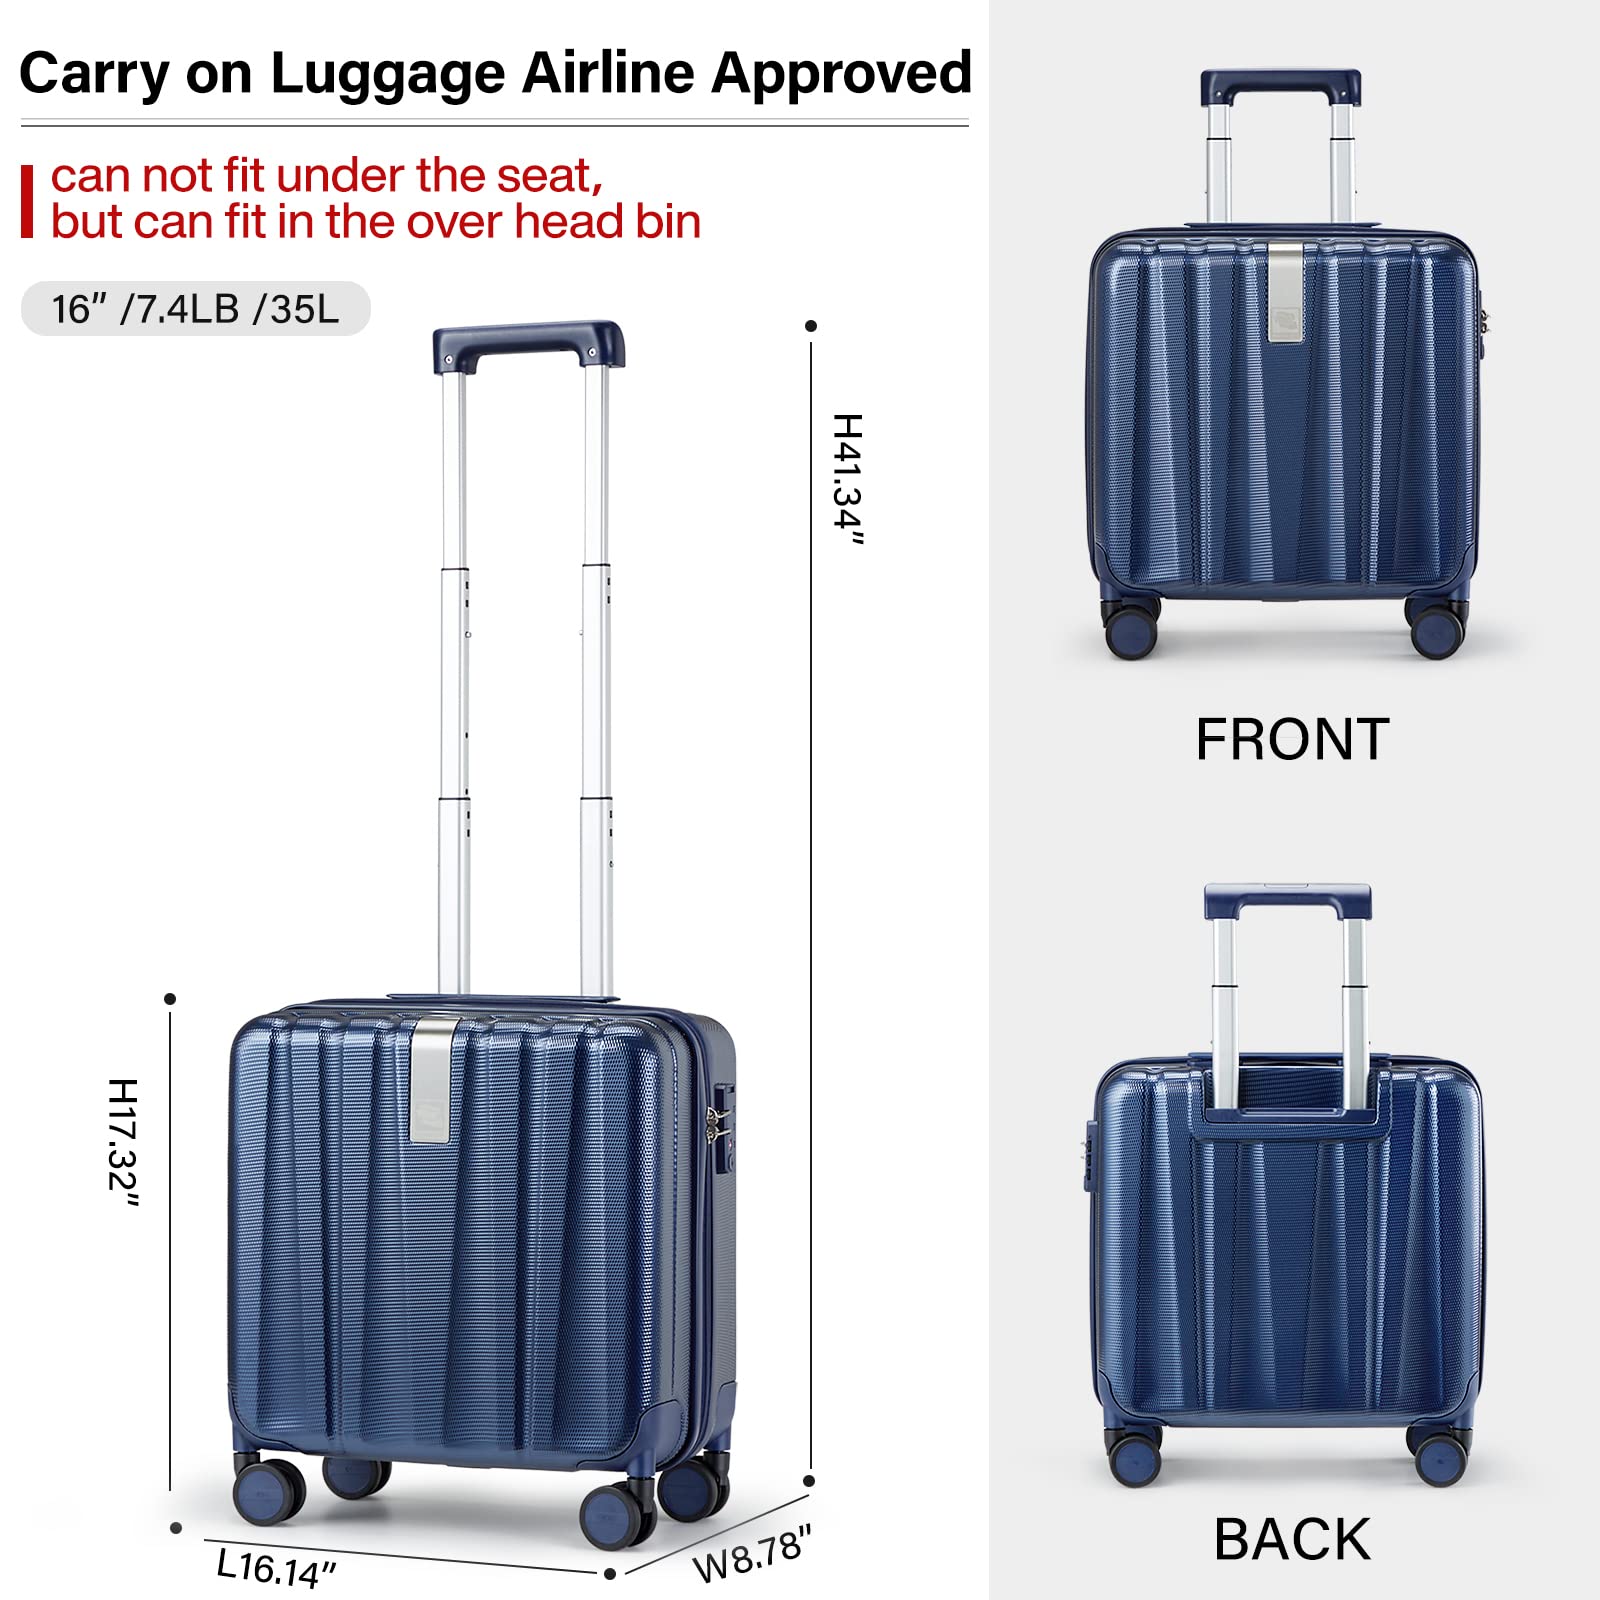 Hanke Carry On Luggage Airline Approved, TSA Luggage Lighiweight Carry On  Suitcase hard shell Travel Luggage Suit Case with Wheels Rolling Luggage